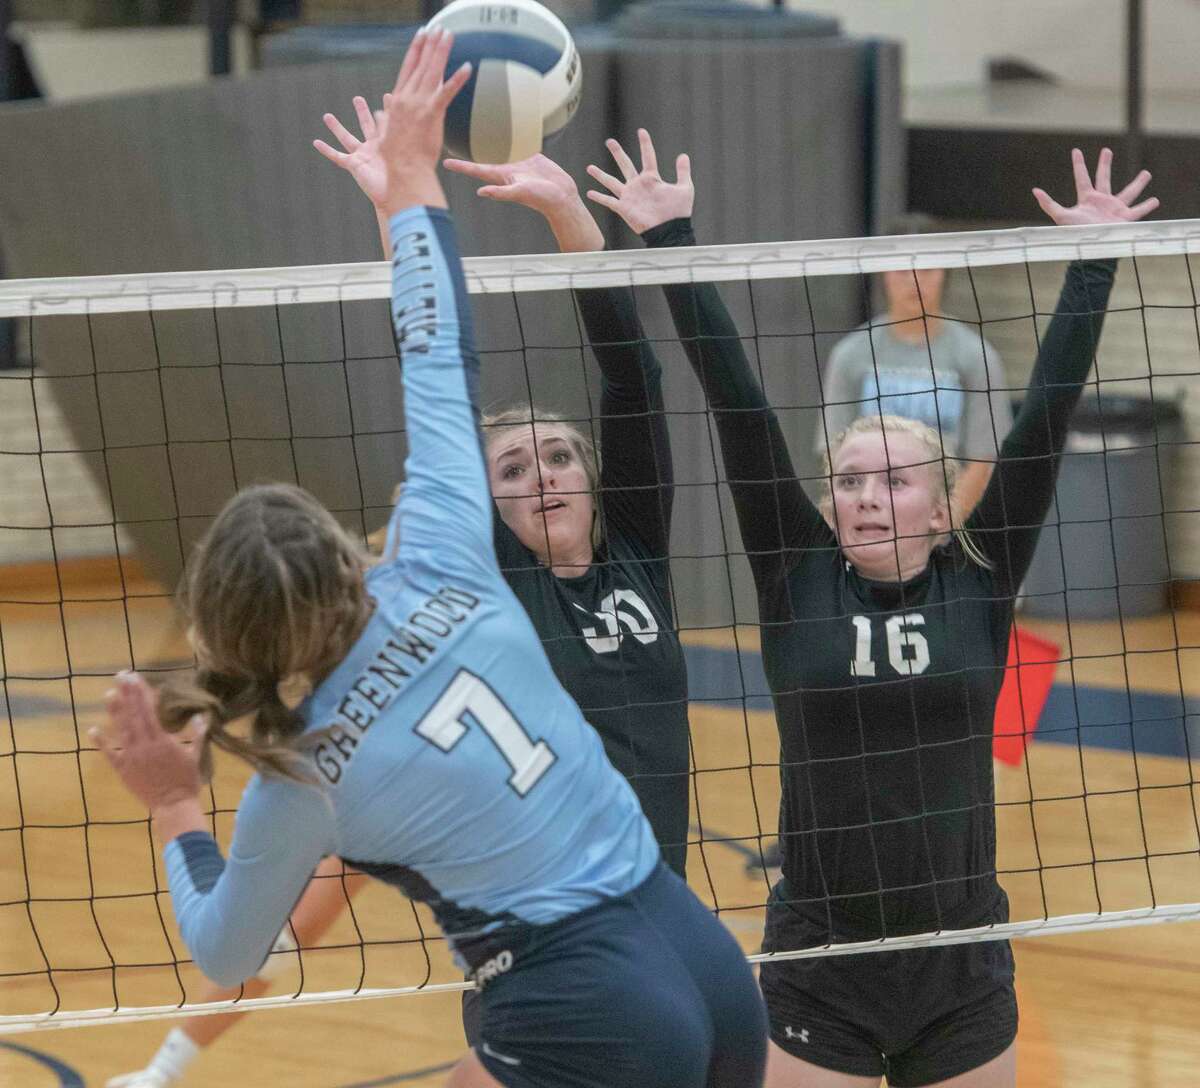 Greenwood's Kirklyn Smith looks for a hit as Midland Classical's Elise Grigsby and Kenedi Carter try to block 08/31/2021 at Greenwood High School. Tim Fischer/Reporter-Telegram